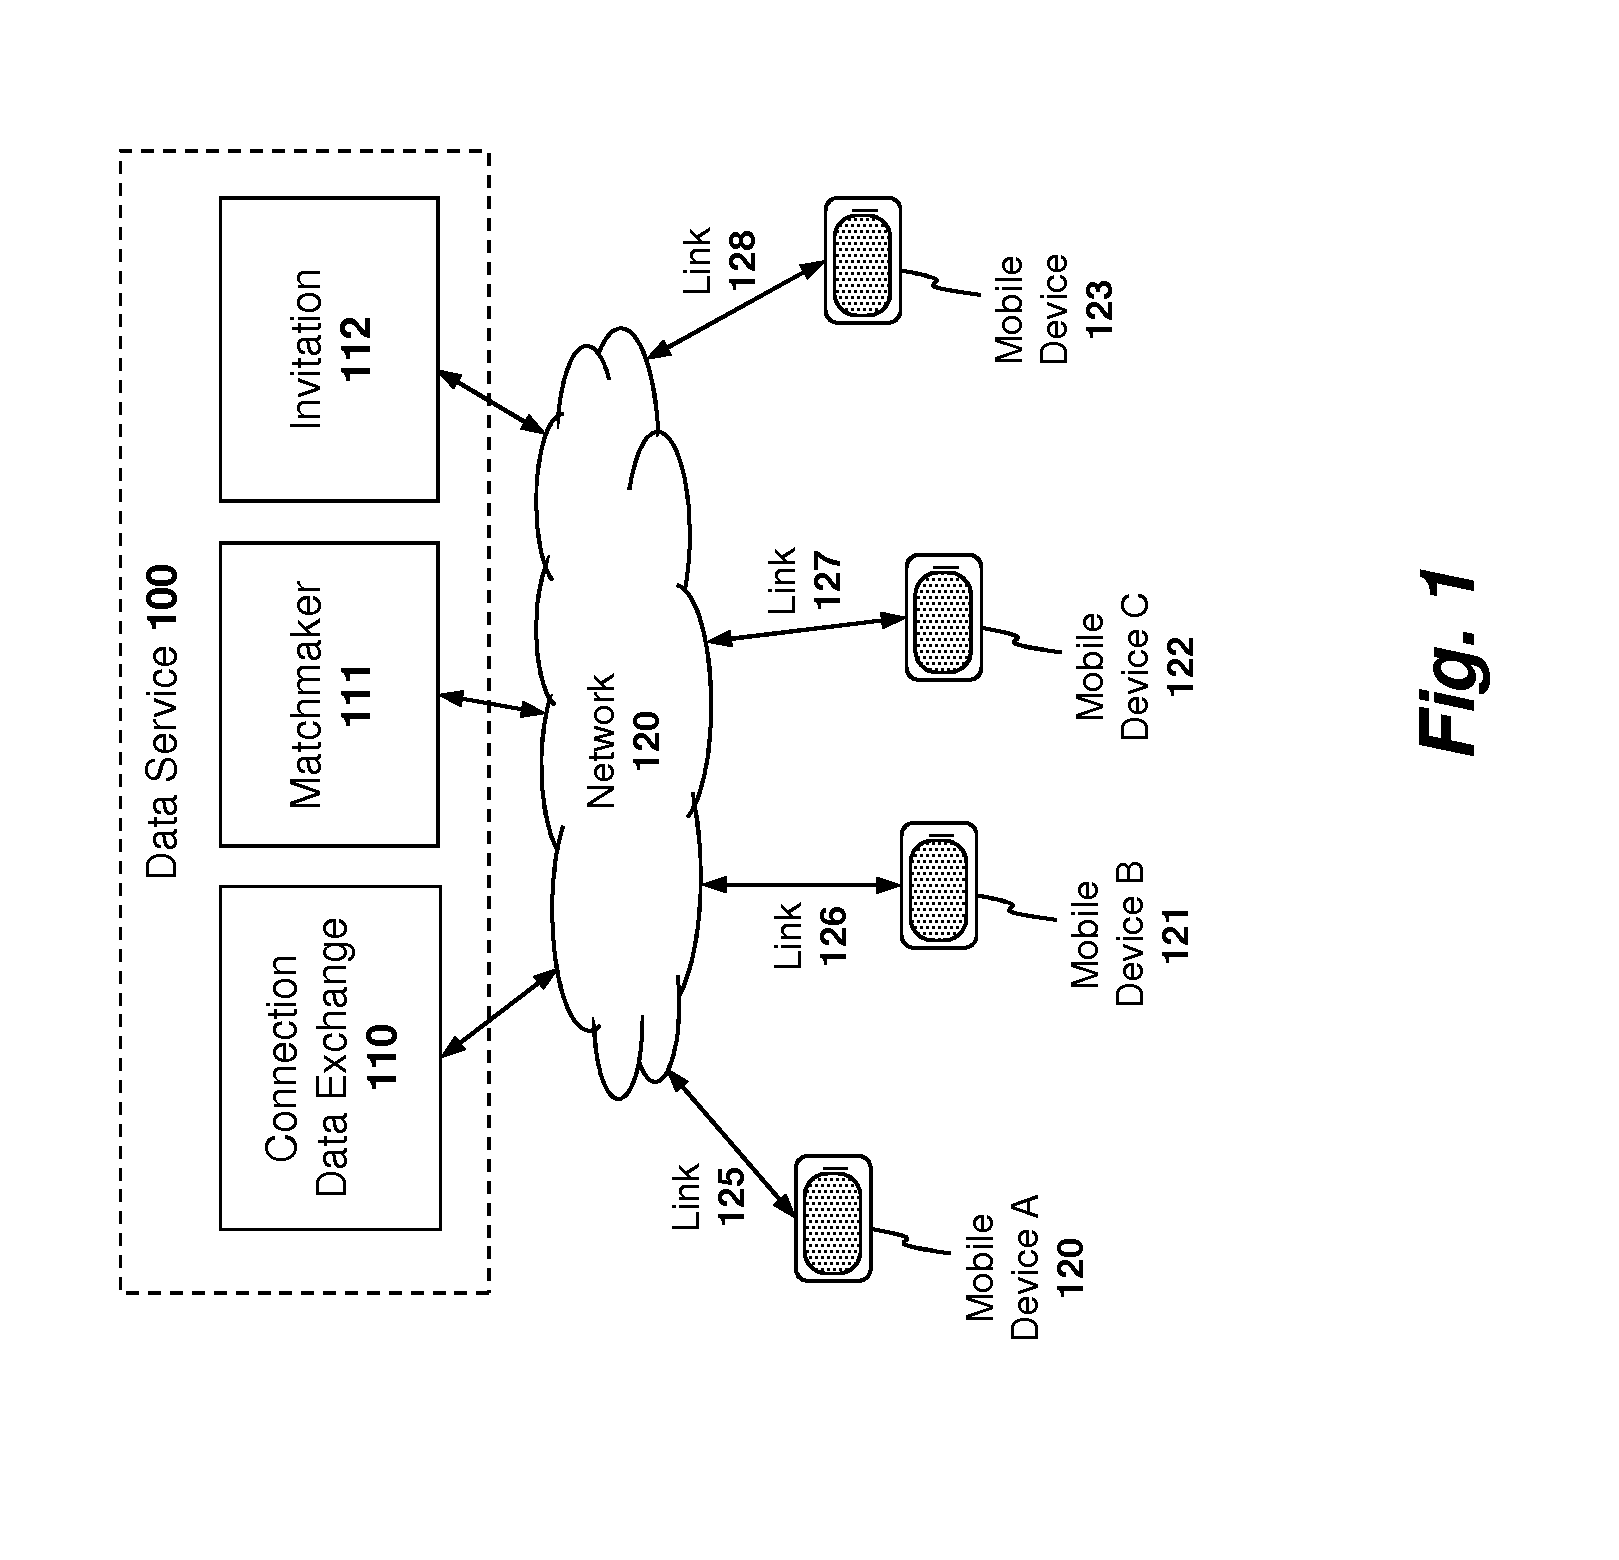 Apparatus and method for managing peer-to-peer connections between different service providers